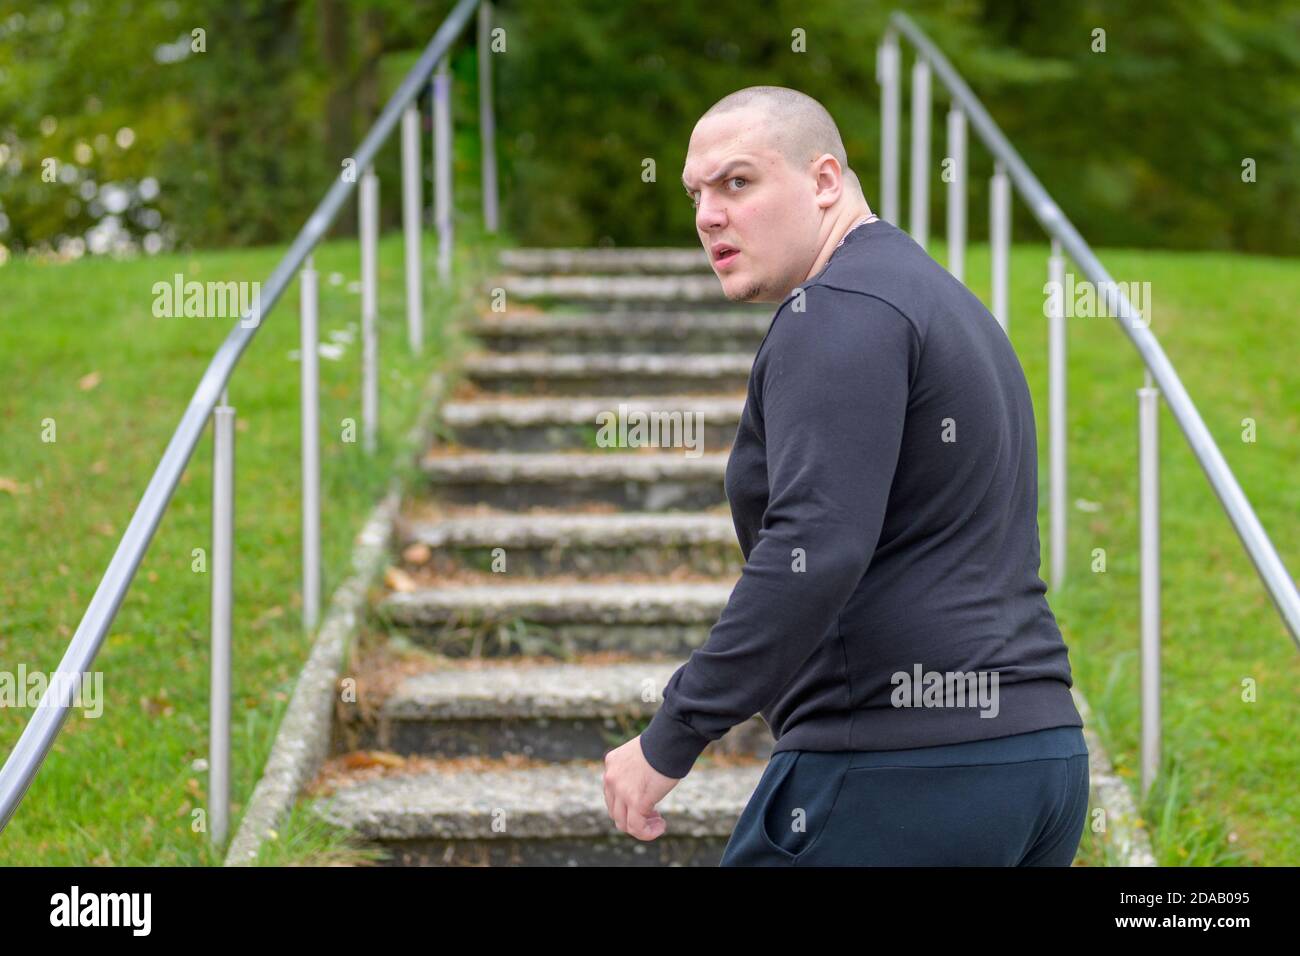 Angry aggressive young man turning to yell at the camera with a look of fury as he walks up steps in a green park Stock Photo